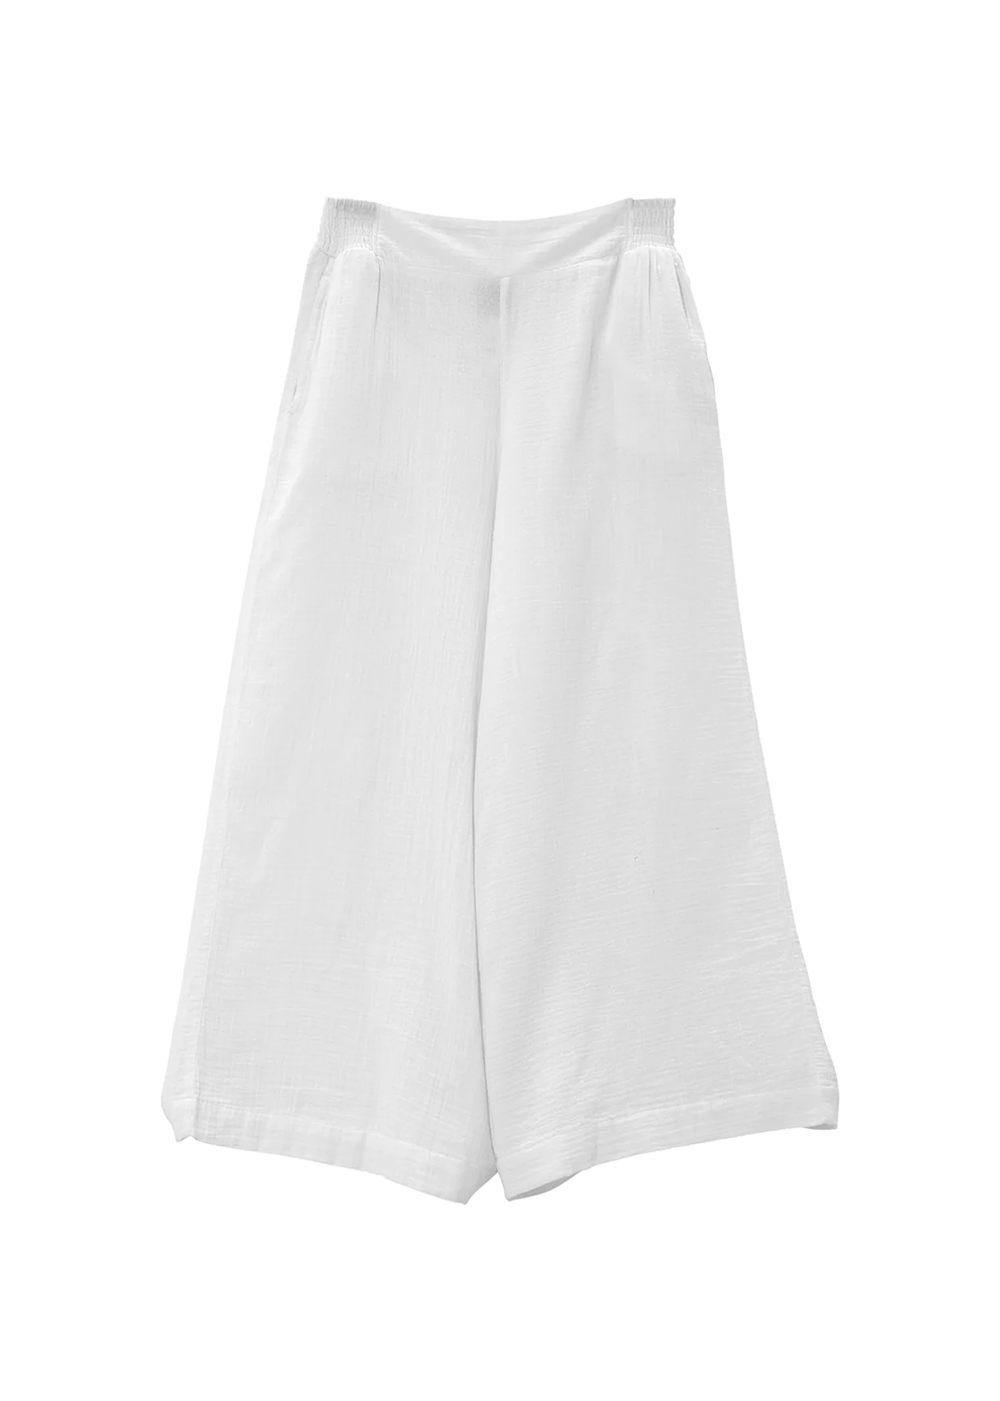 Front view of white pants from Echo New York that widen at the leg for an airy fit and elastic waistband for comfort